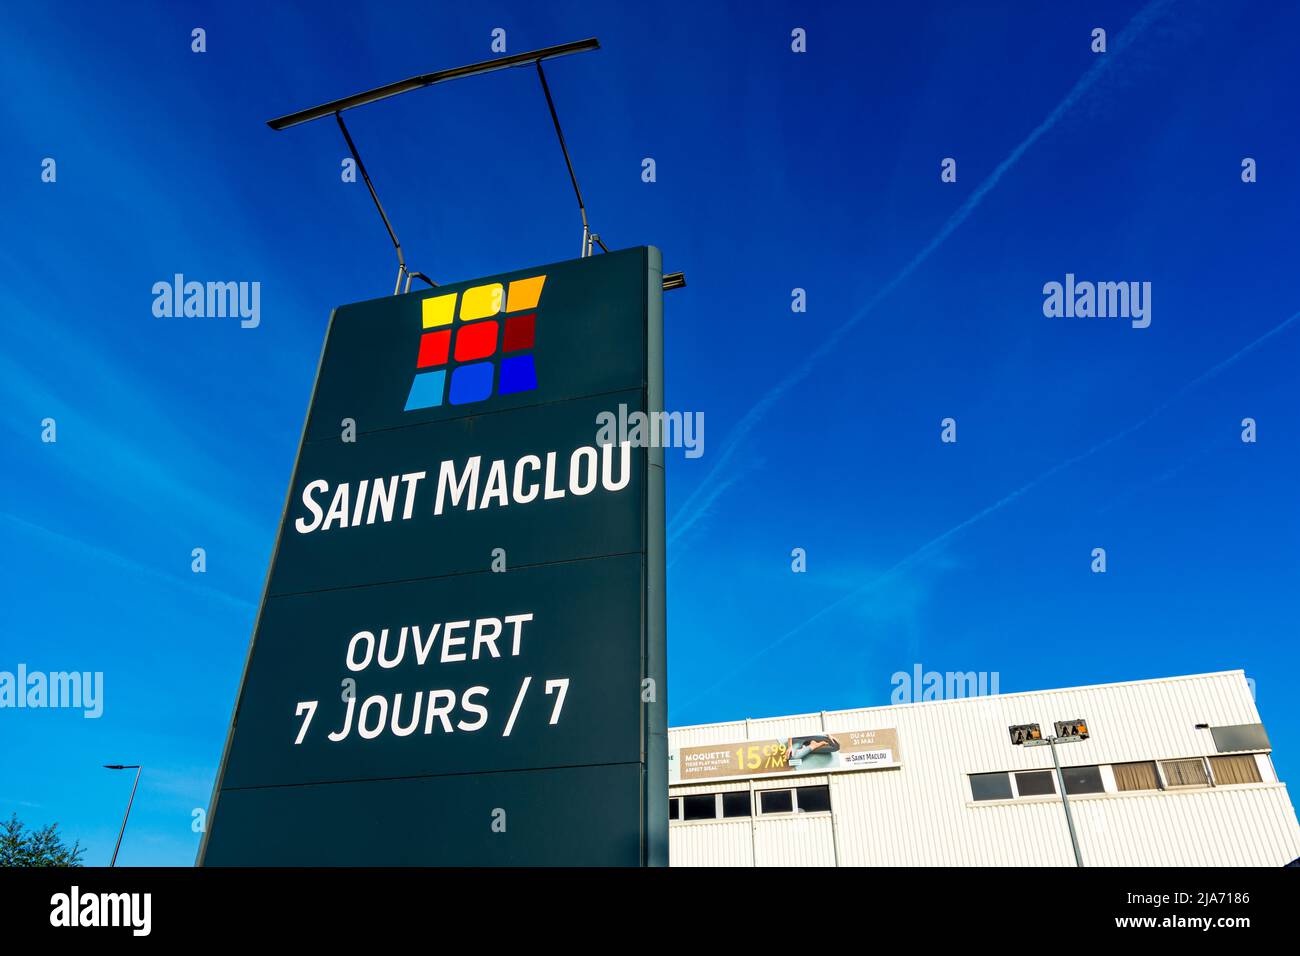 Sign of a Saint-Maclou store. Saint-Maclou is a French company specializing in the decoration of walls, floors and windows Stock Photo